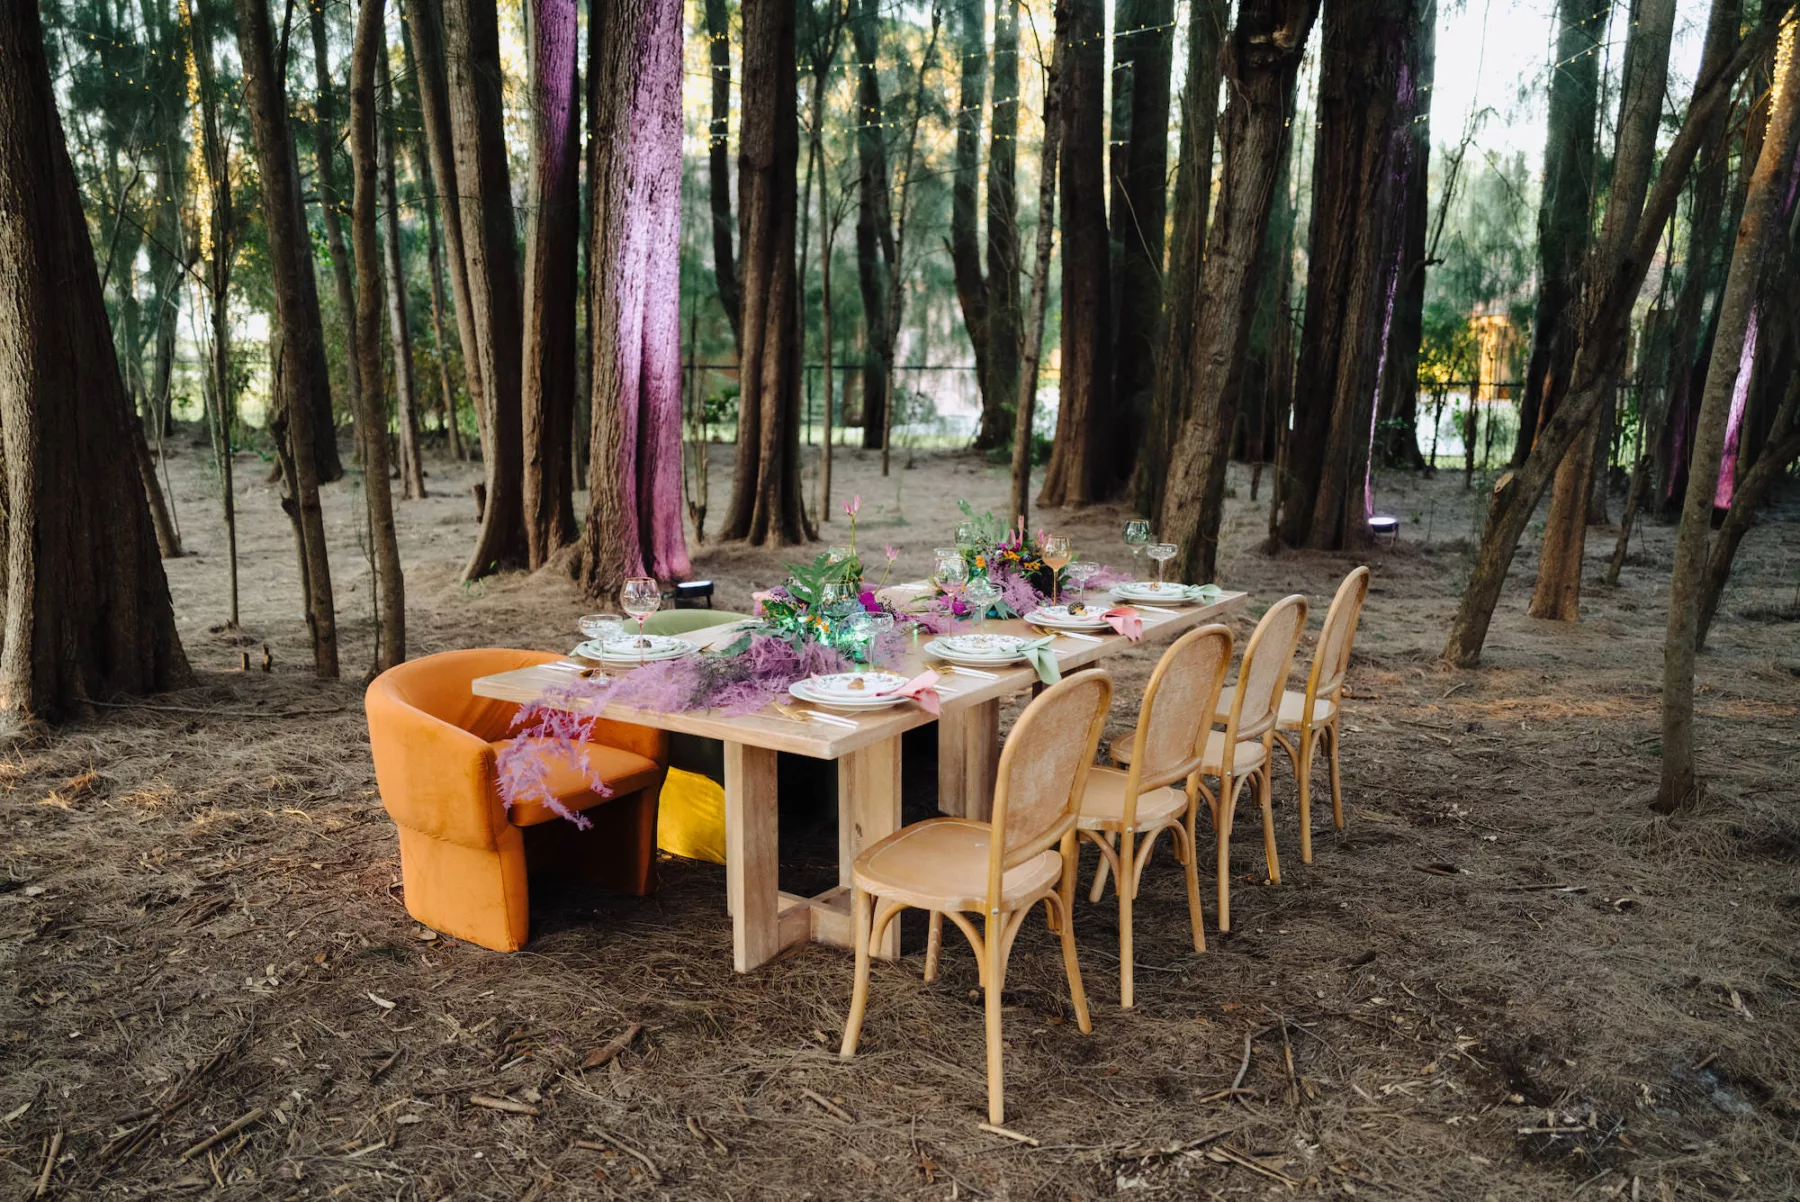 Whimsical Forest Wedding Reception Tablescape Ideas | Tampa Bay Event Planner Wilder Mind Events | Outdoor Private Estate Wedding Venue Royal Pine Estate